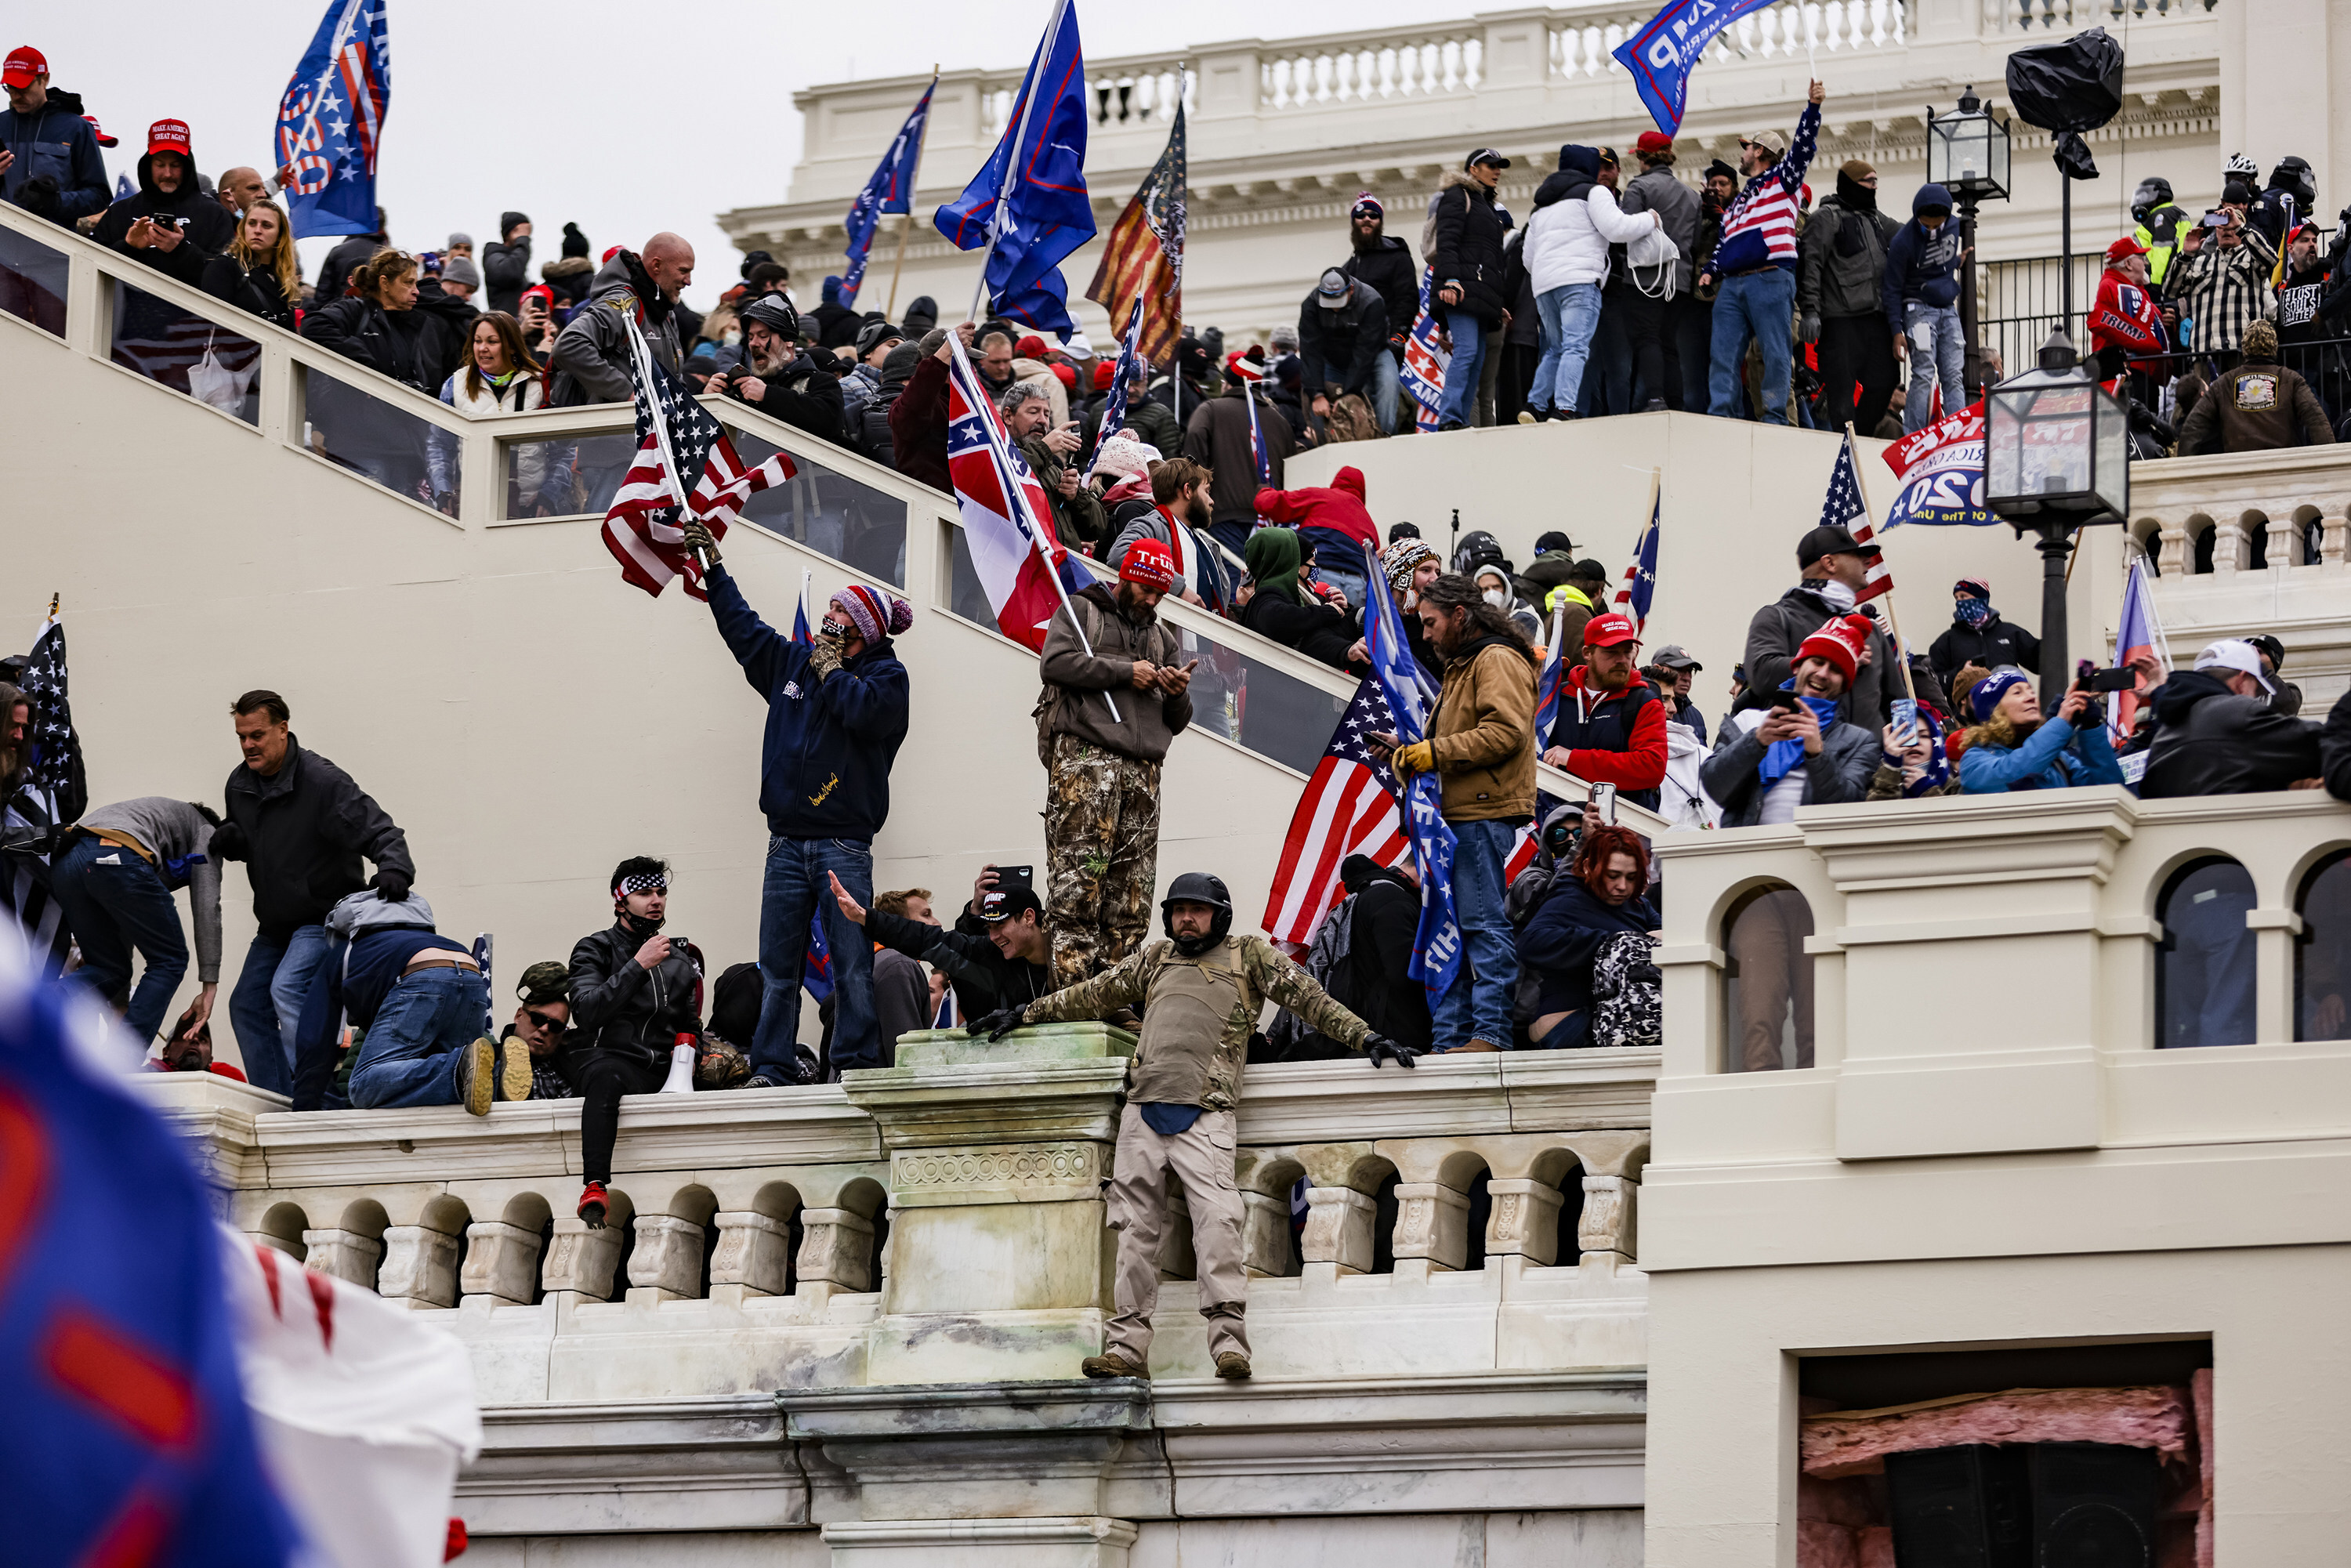 Pro-Trump supporters storming the US Capitol in Washington on January 6. Photo: TNS